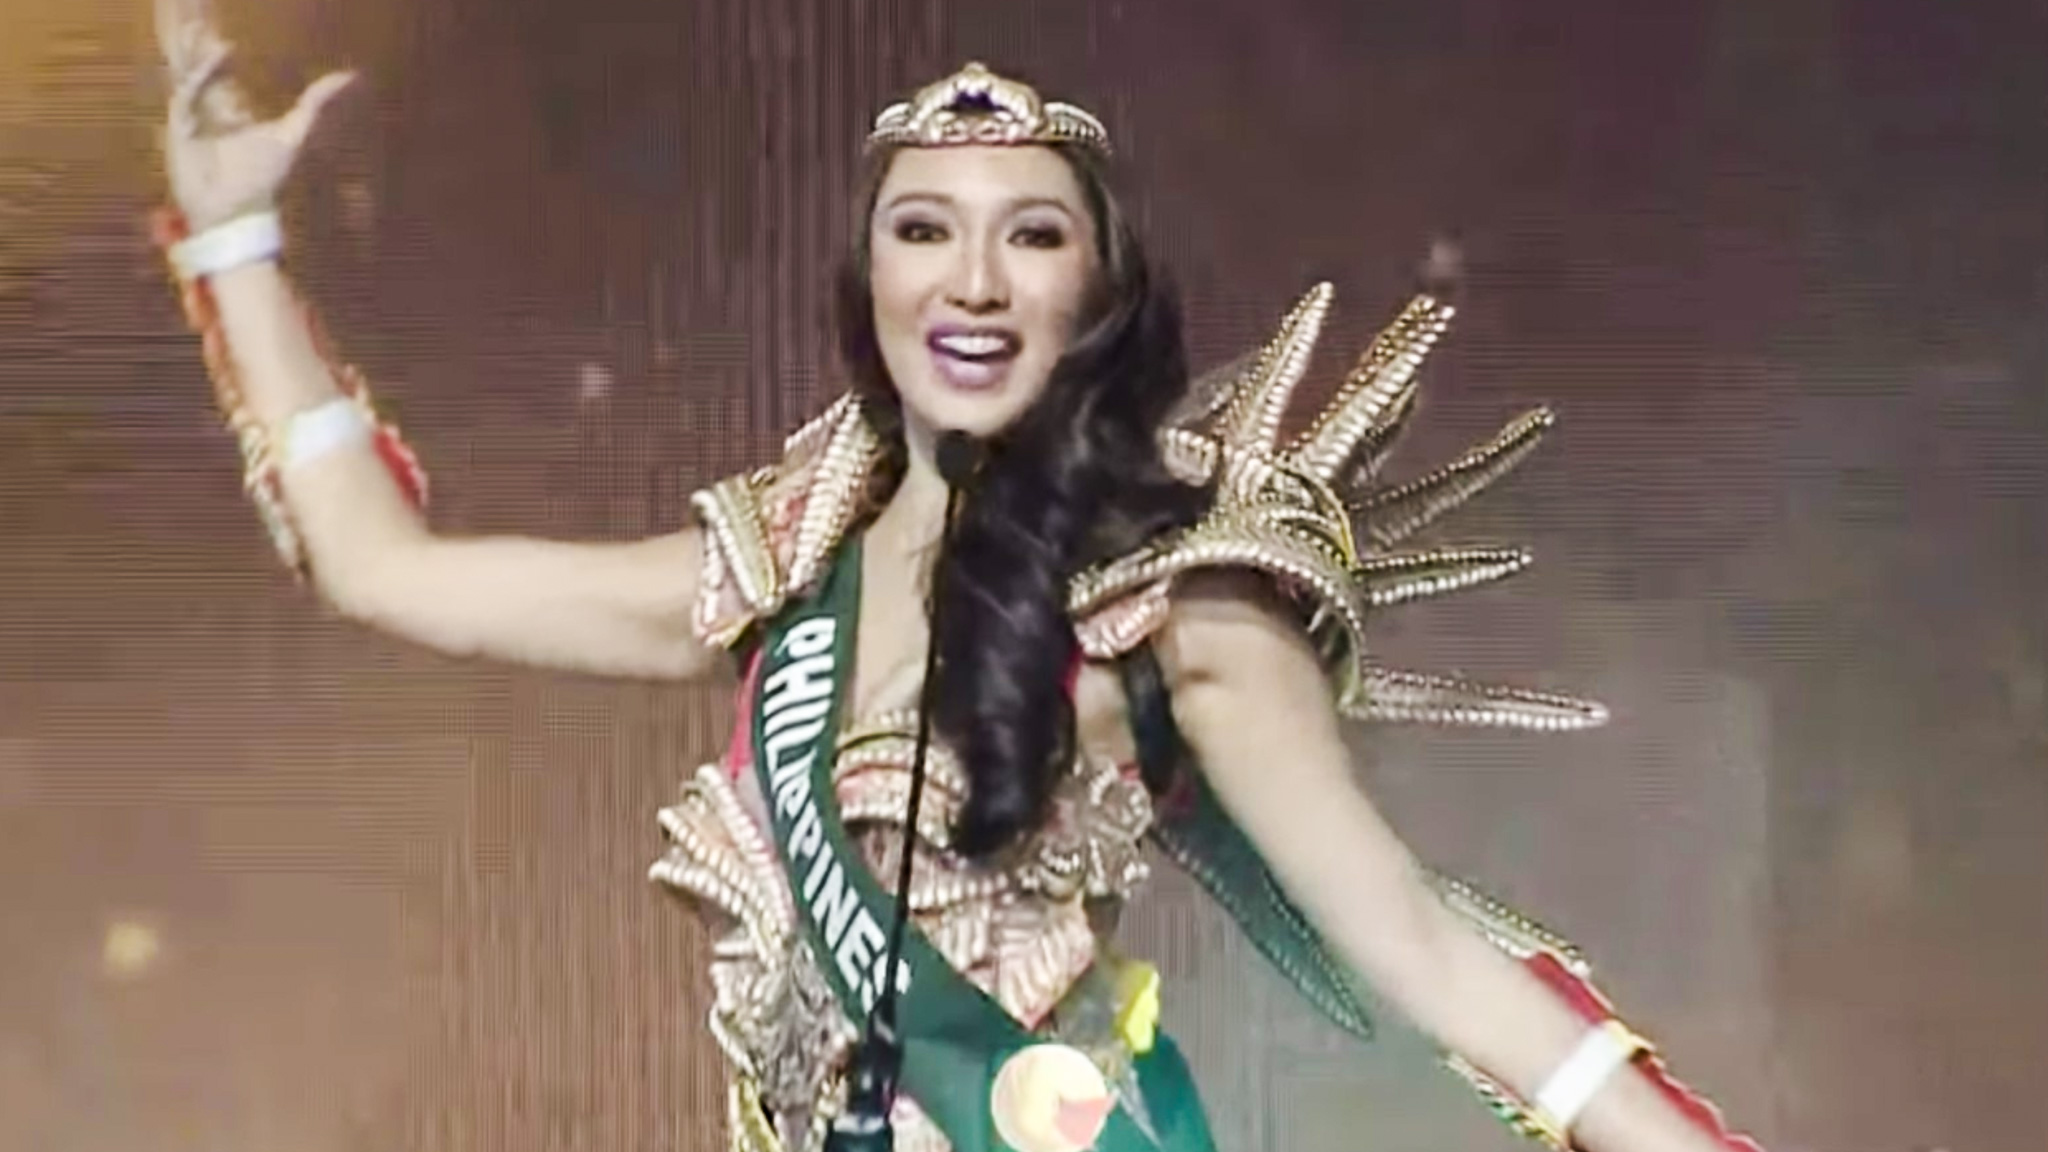 KAREN IBASCO. The Philippines' delegate  is dressed as a superhero as the Miss Earth 2017 coronation night kicks off. Rappler screengrab, photos by Alecs Ongcal/Rappler  